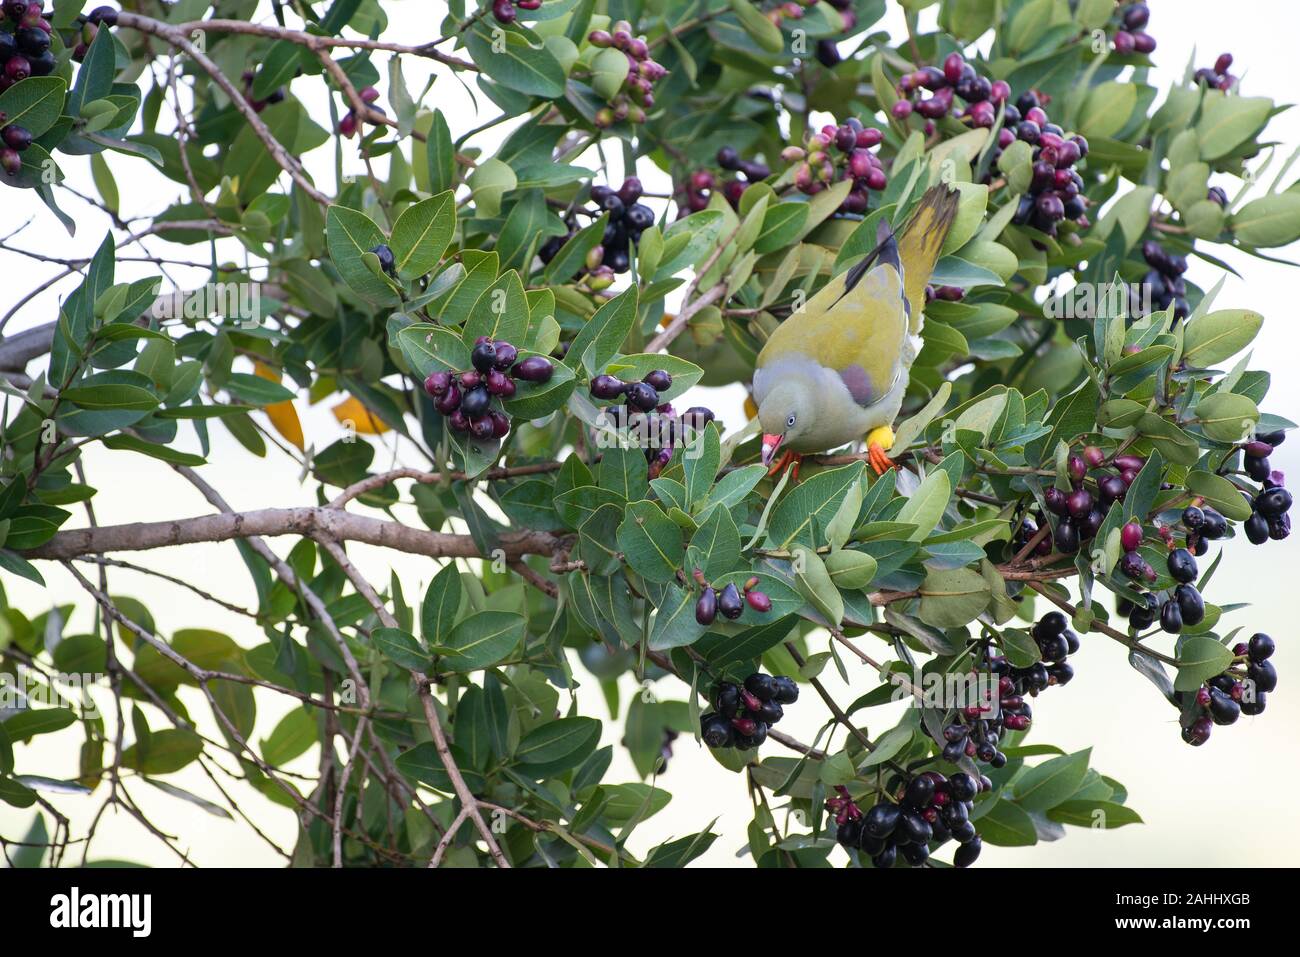 An African Green Pigeon - Treron calvus - sits in a waterberry tree - Syzgium cordatum - laden with ripe berries Stock Photo